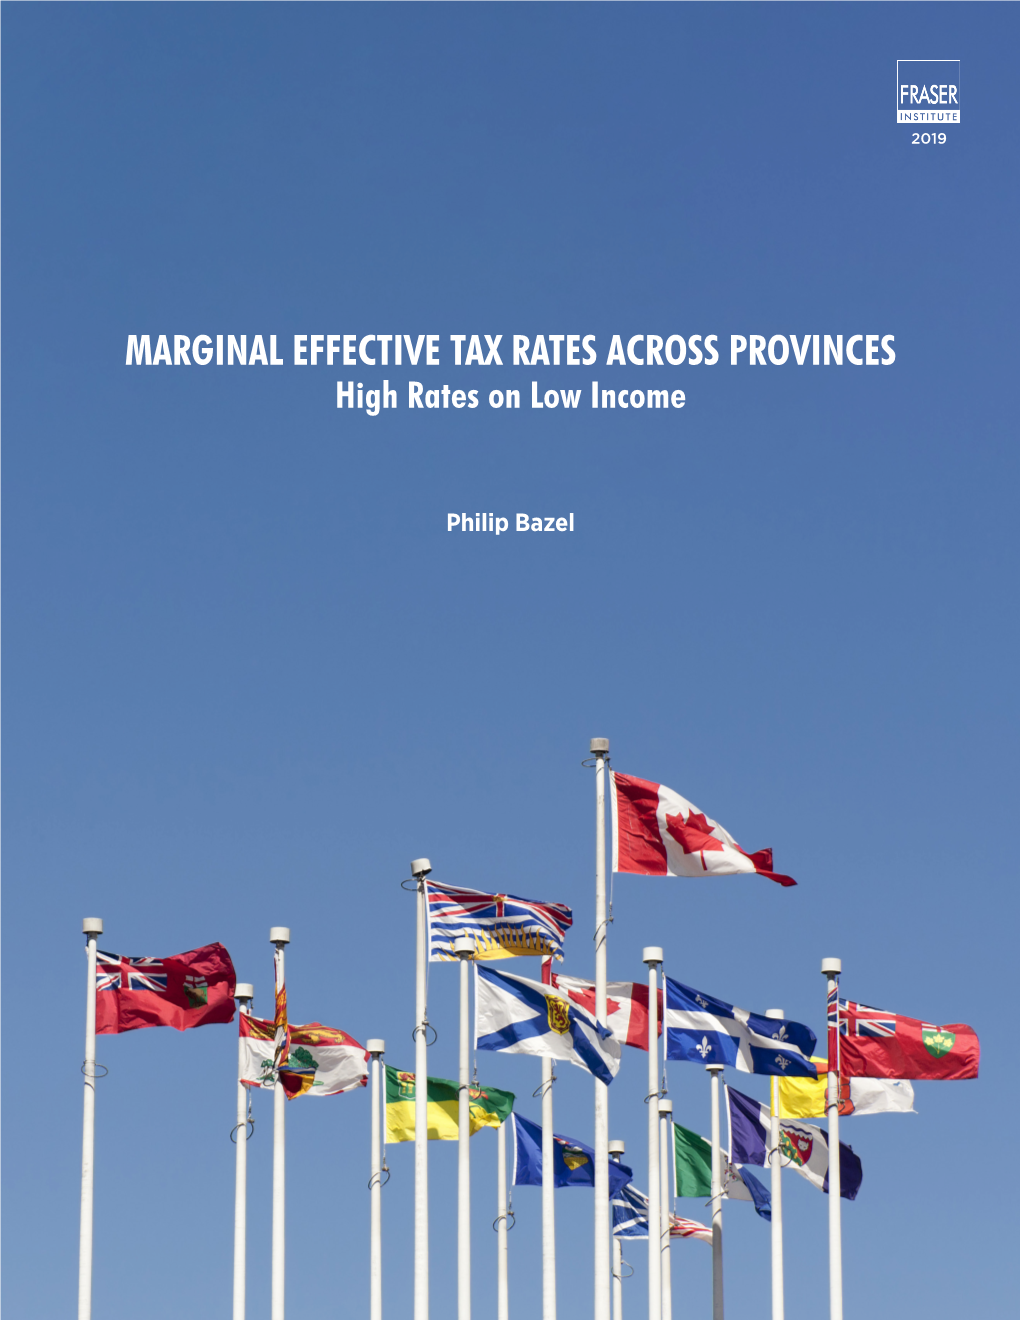 MARGINAL EFFECTIVE TAX RATES ACROSS PROVINCES High Rates on Low Income